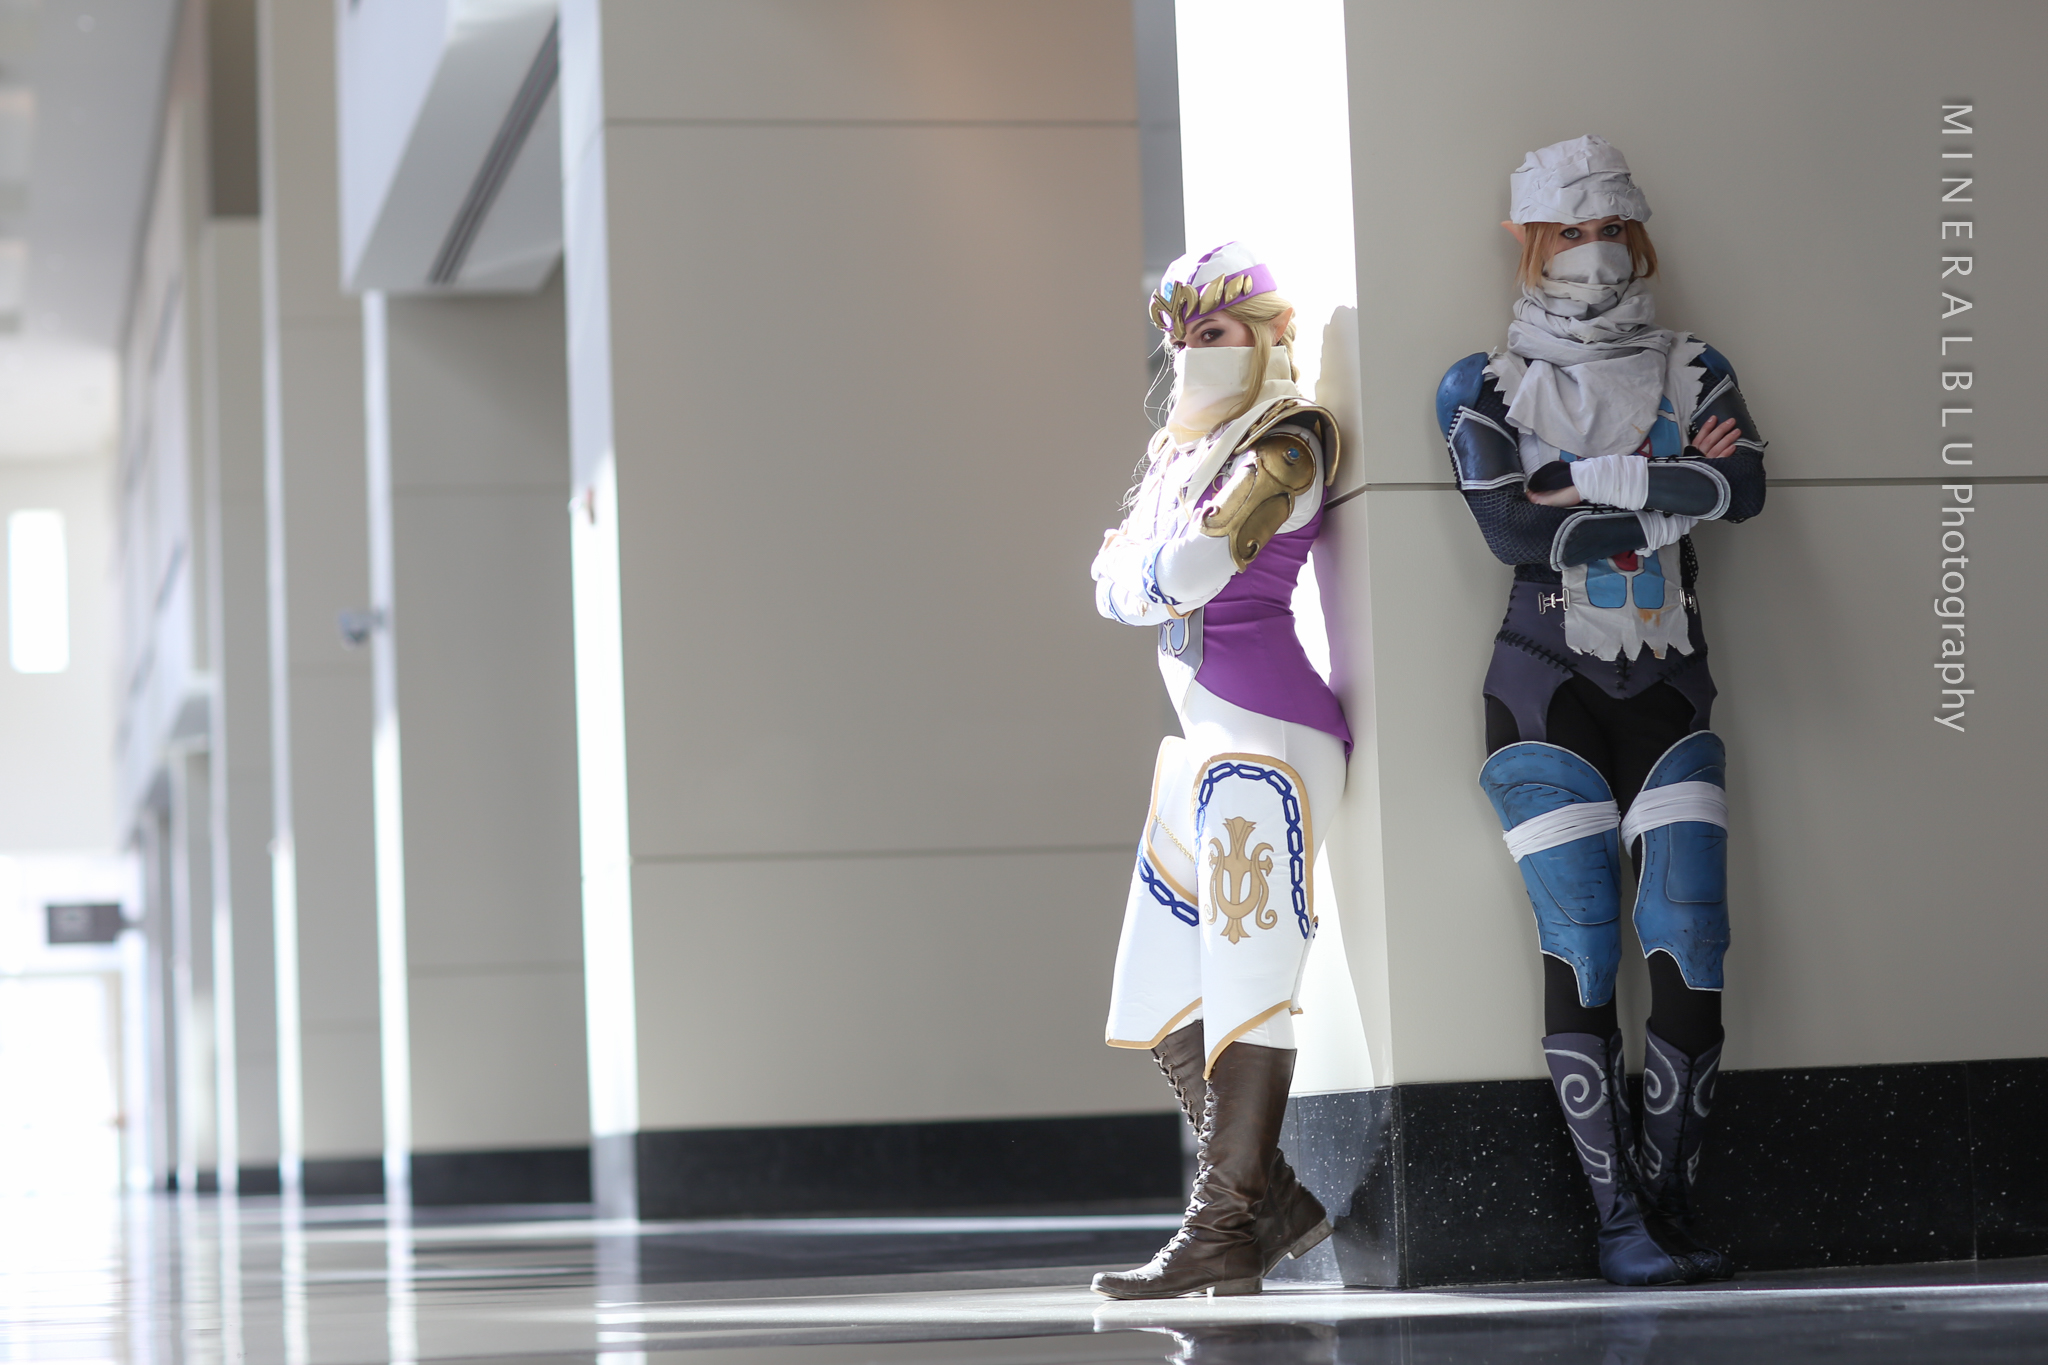 Some Of The Best Cosplay From C2E2